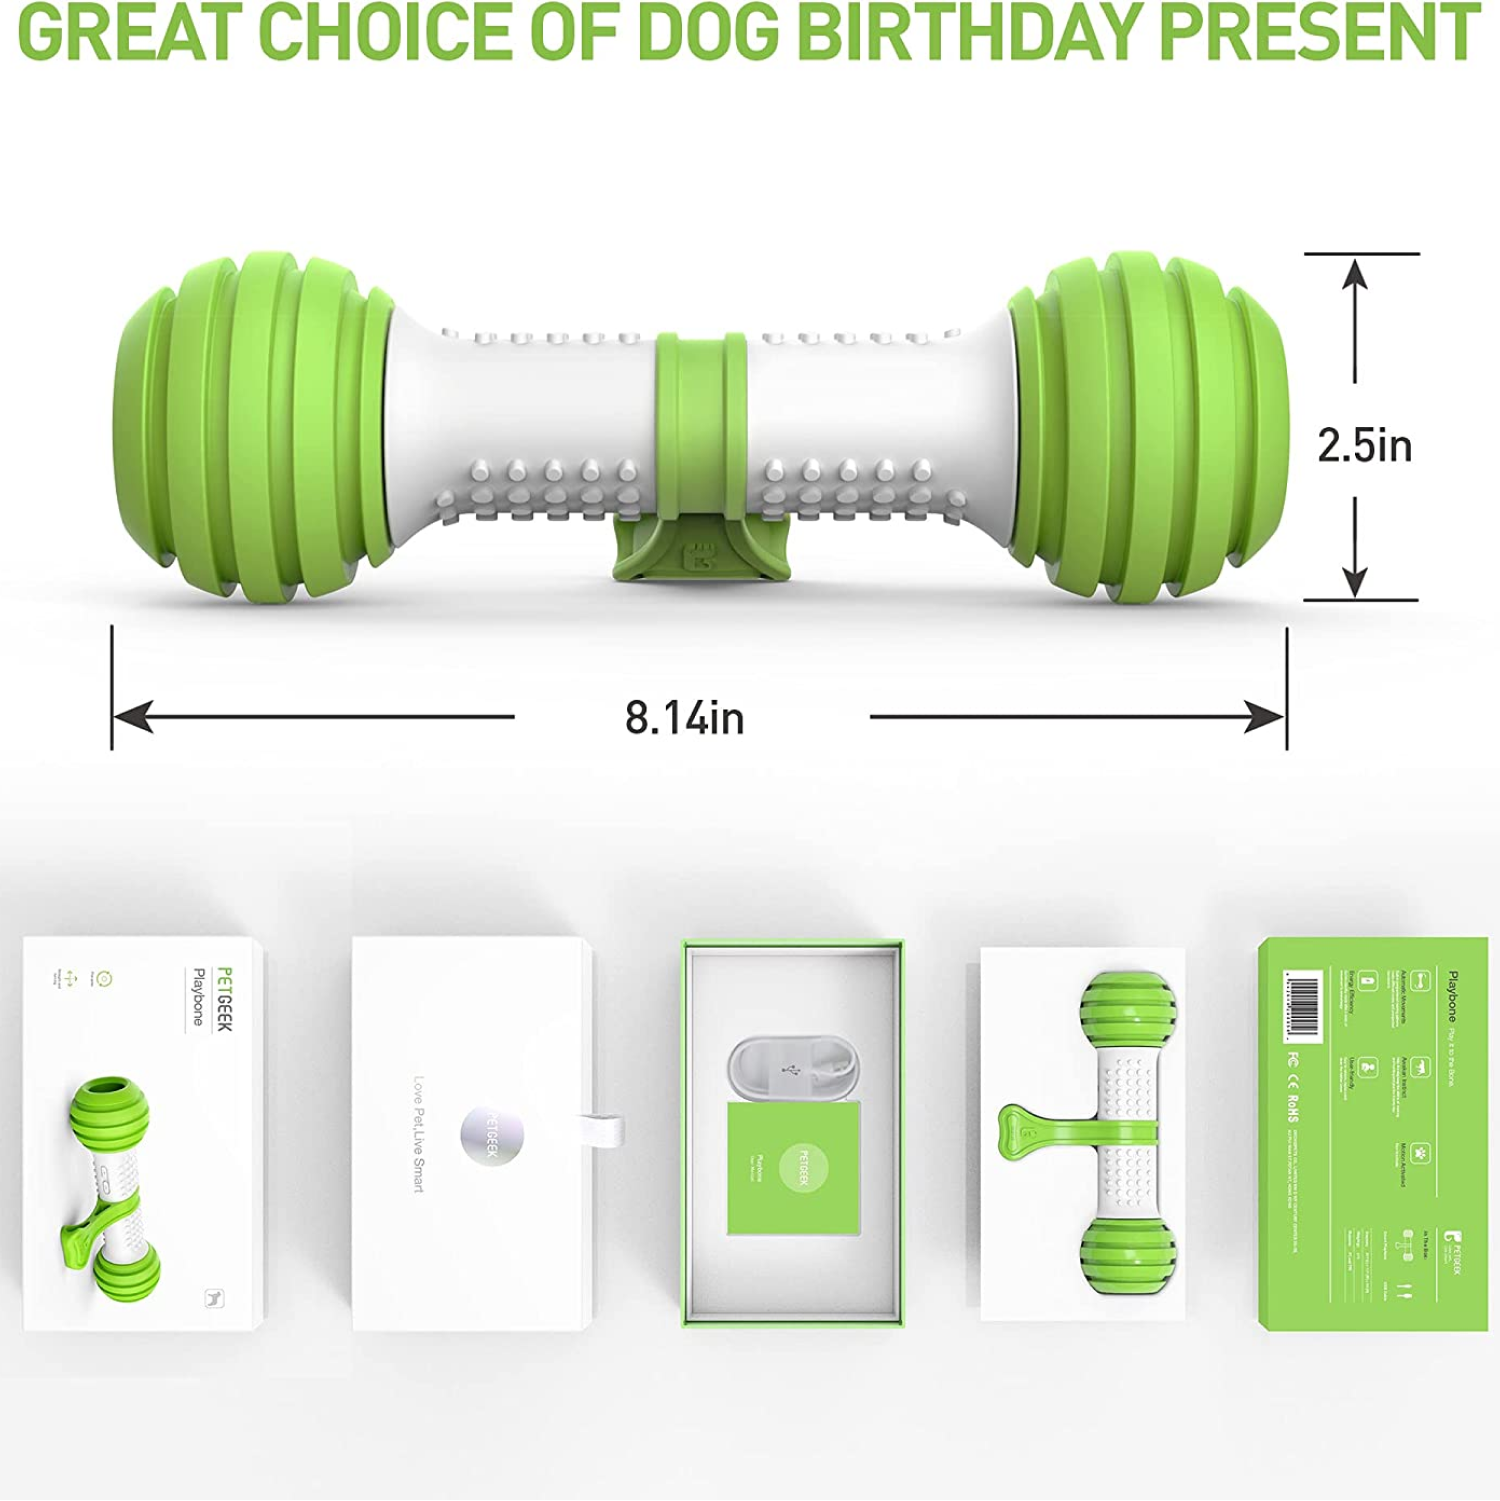 Pet Geek Playbone Toy for Dogs